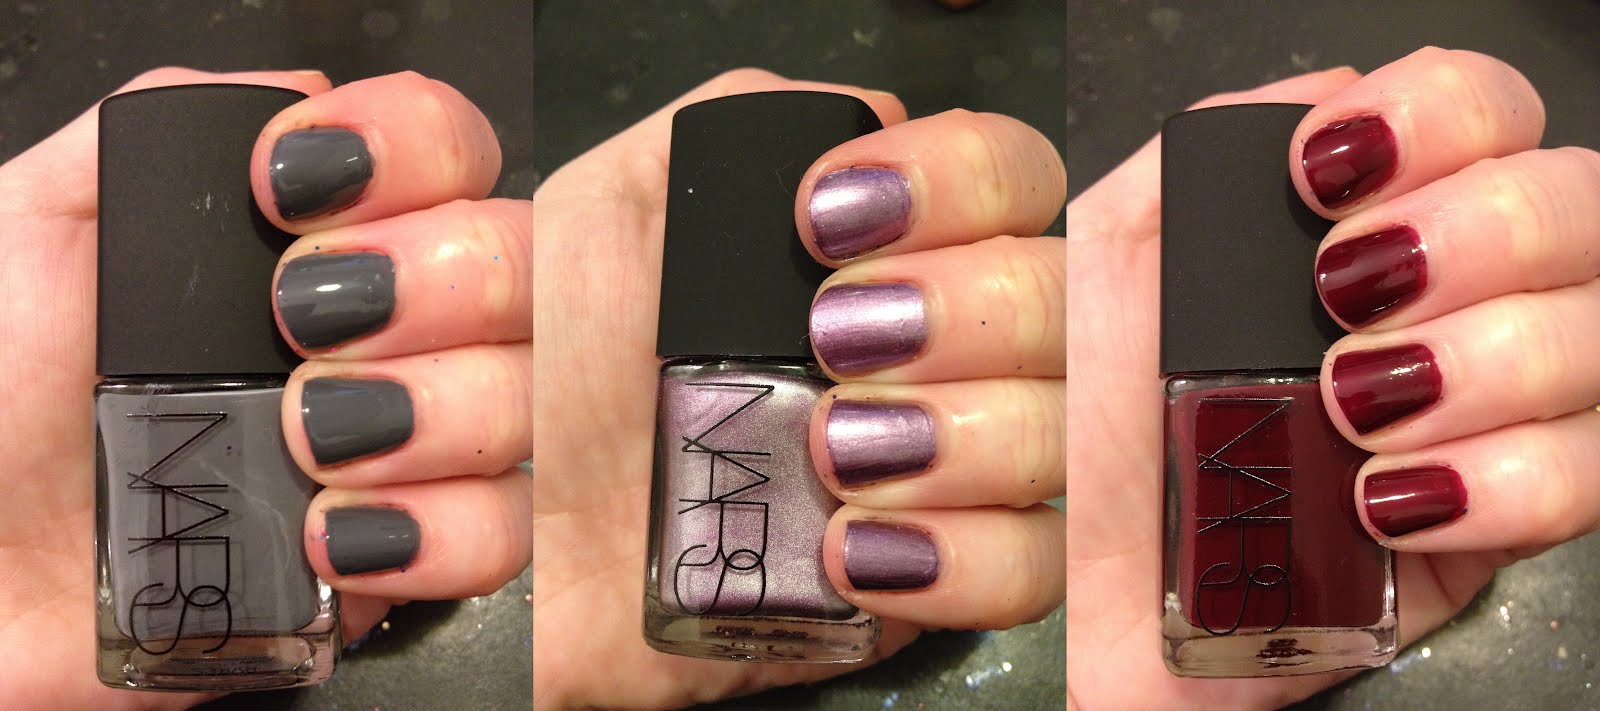 NARS Iconic Color Nail Polish in Hunger - wide 1